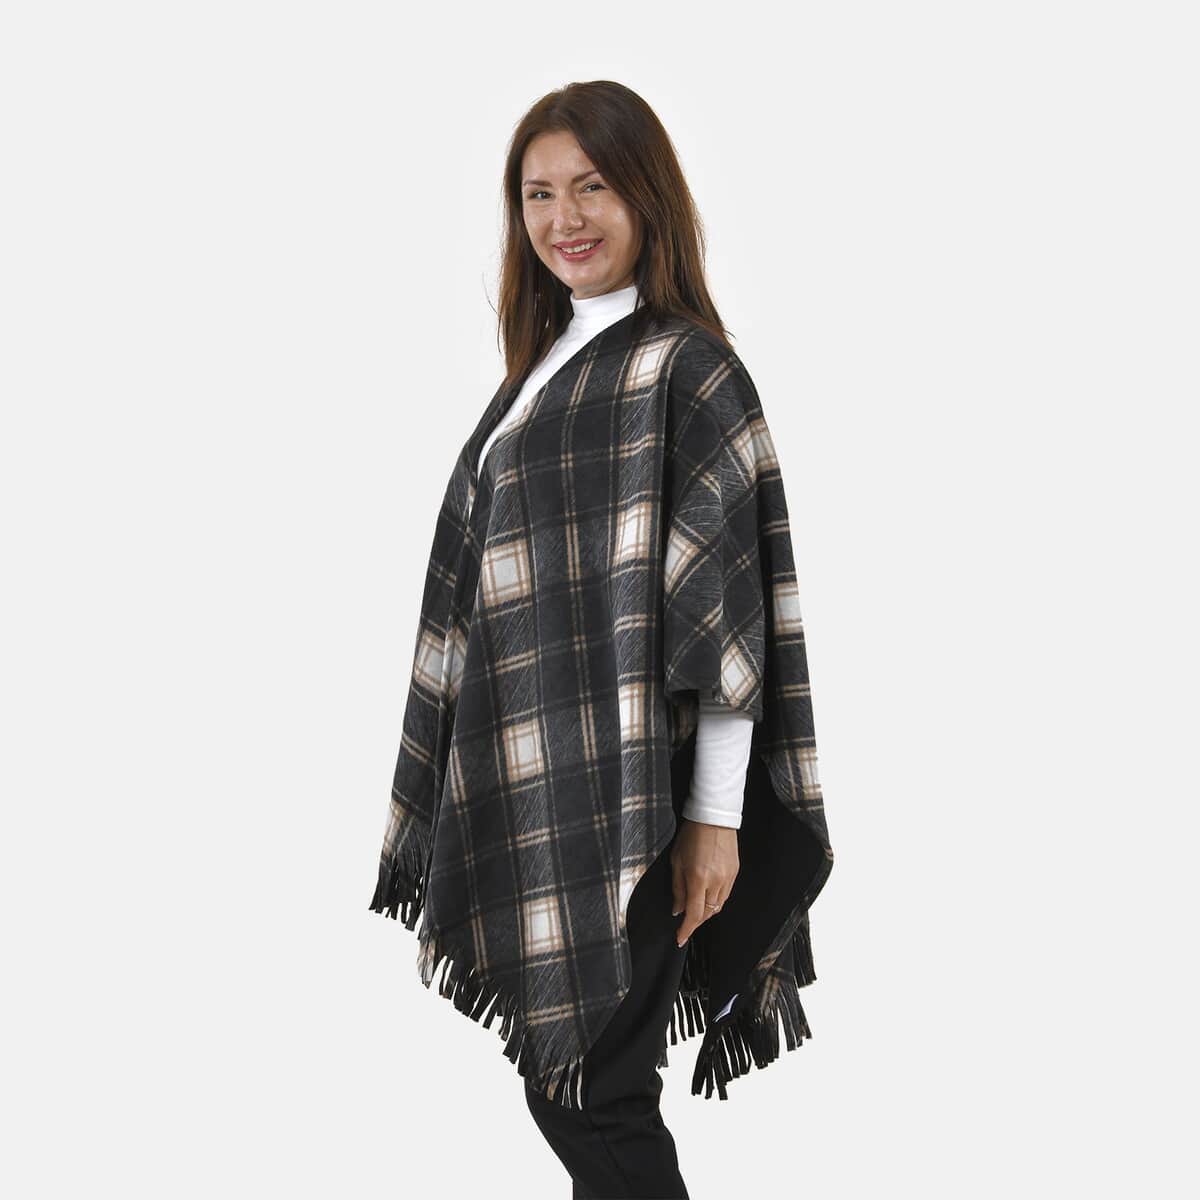 Tamsy Black & Gray Plaid Pattern Double Knit Poncho with Fringe image number 2